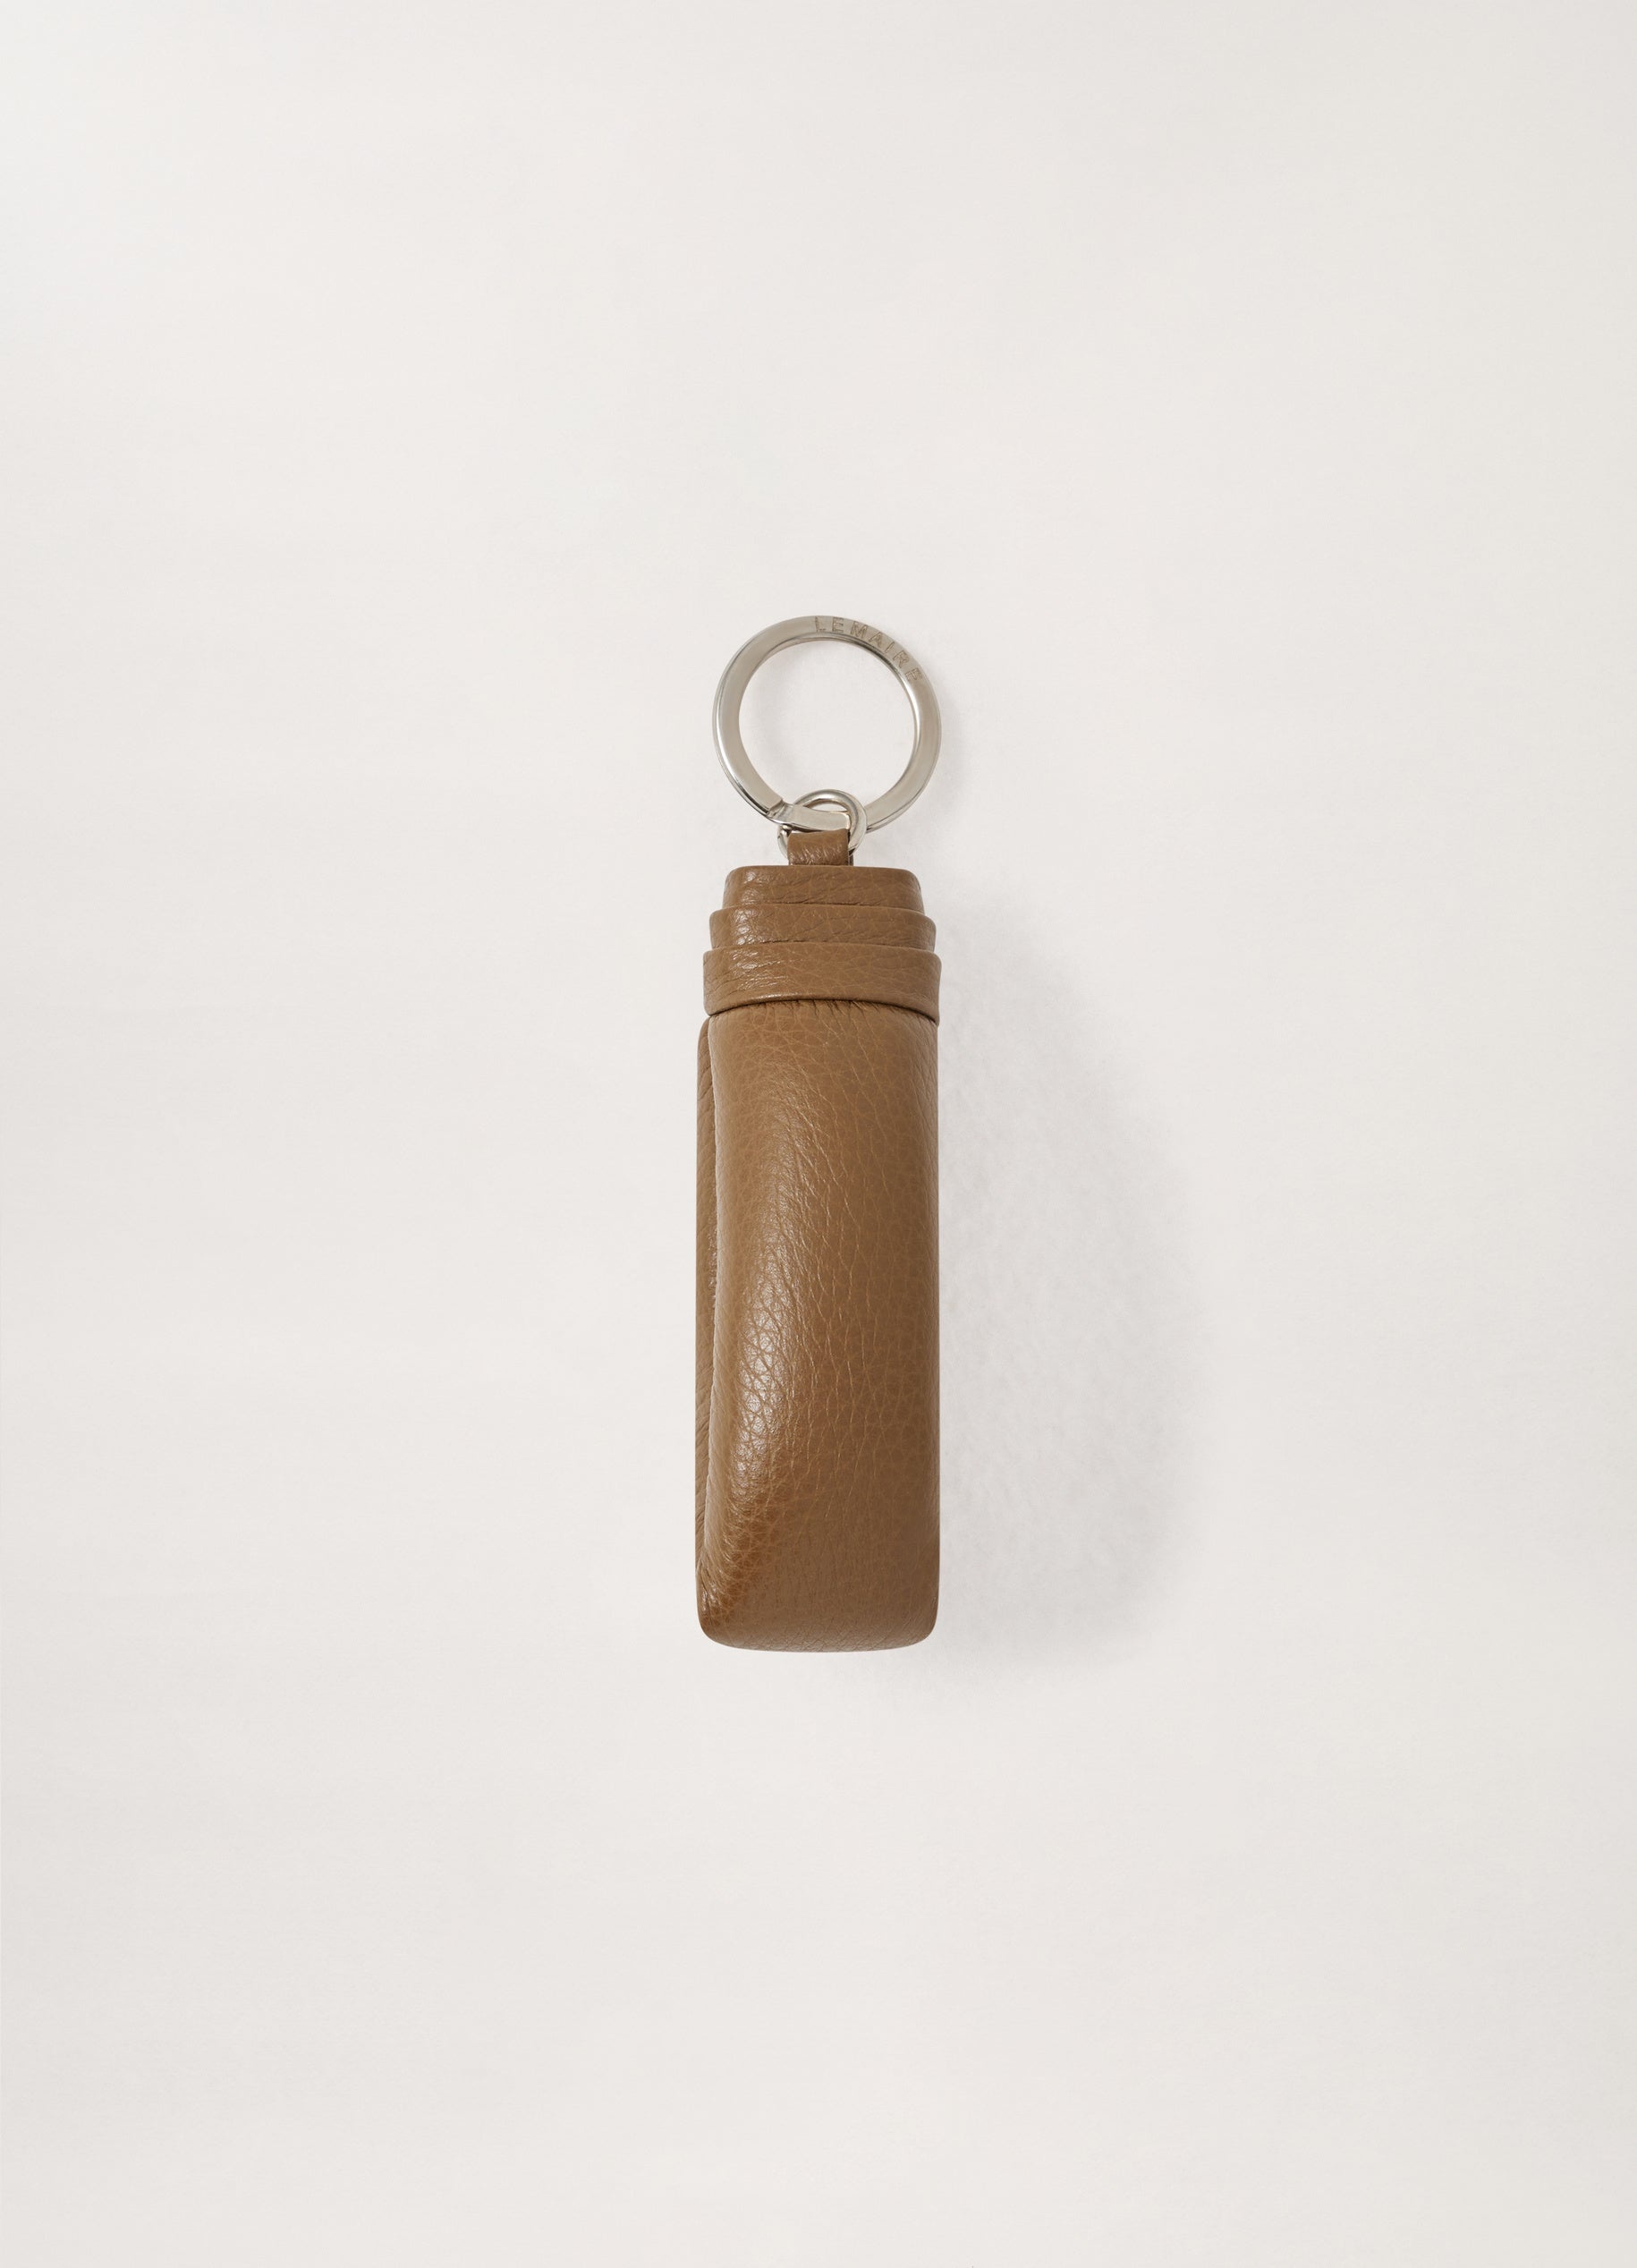 WADDED KEY HOLDER
SOFT GRAINED LEATHER - 1